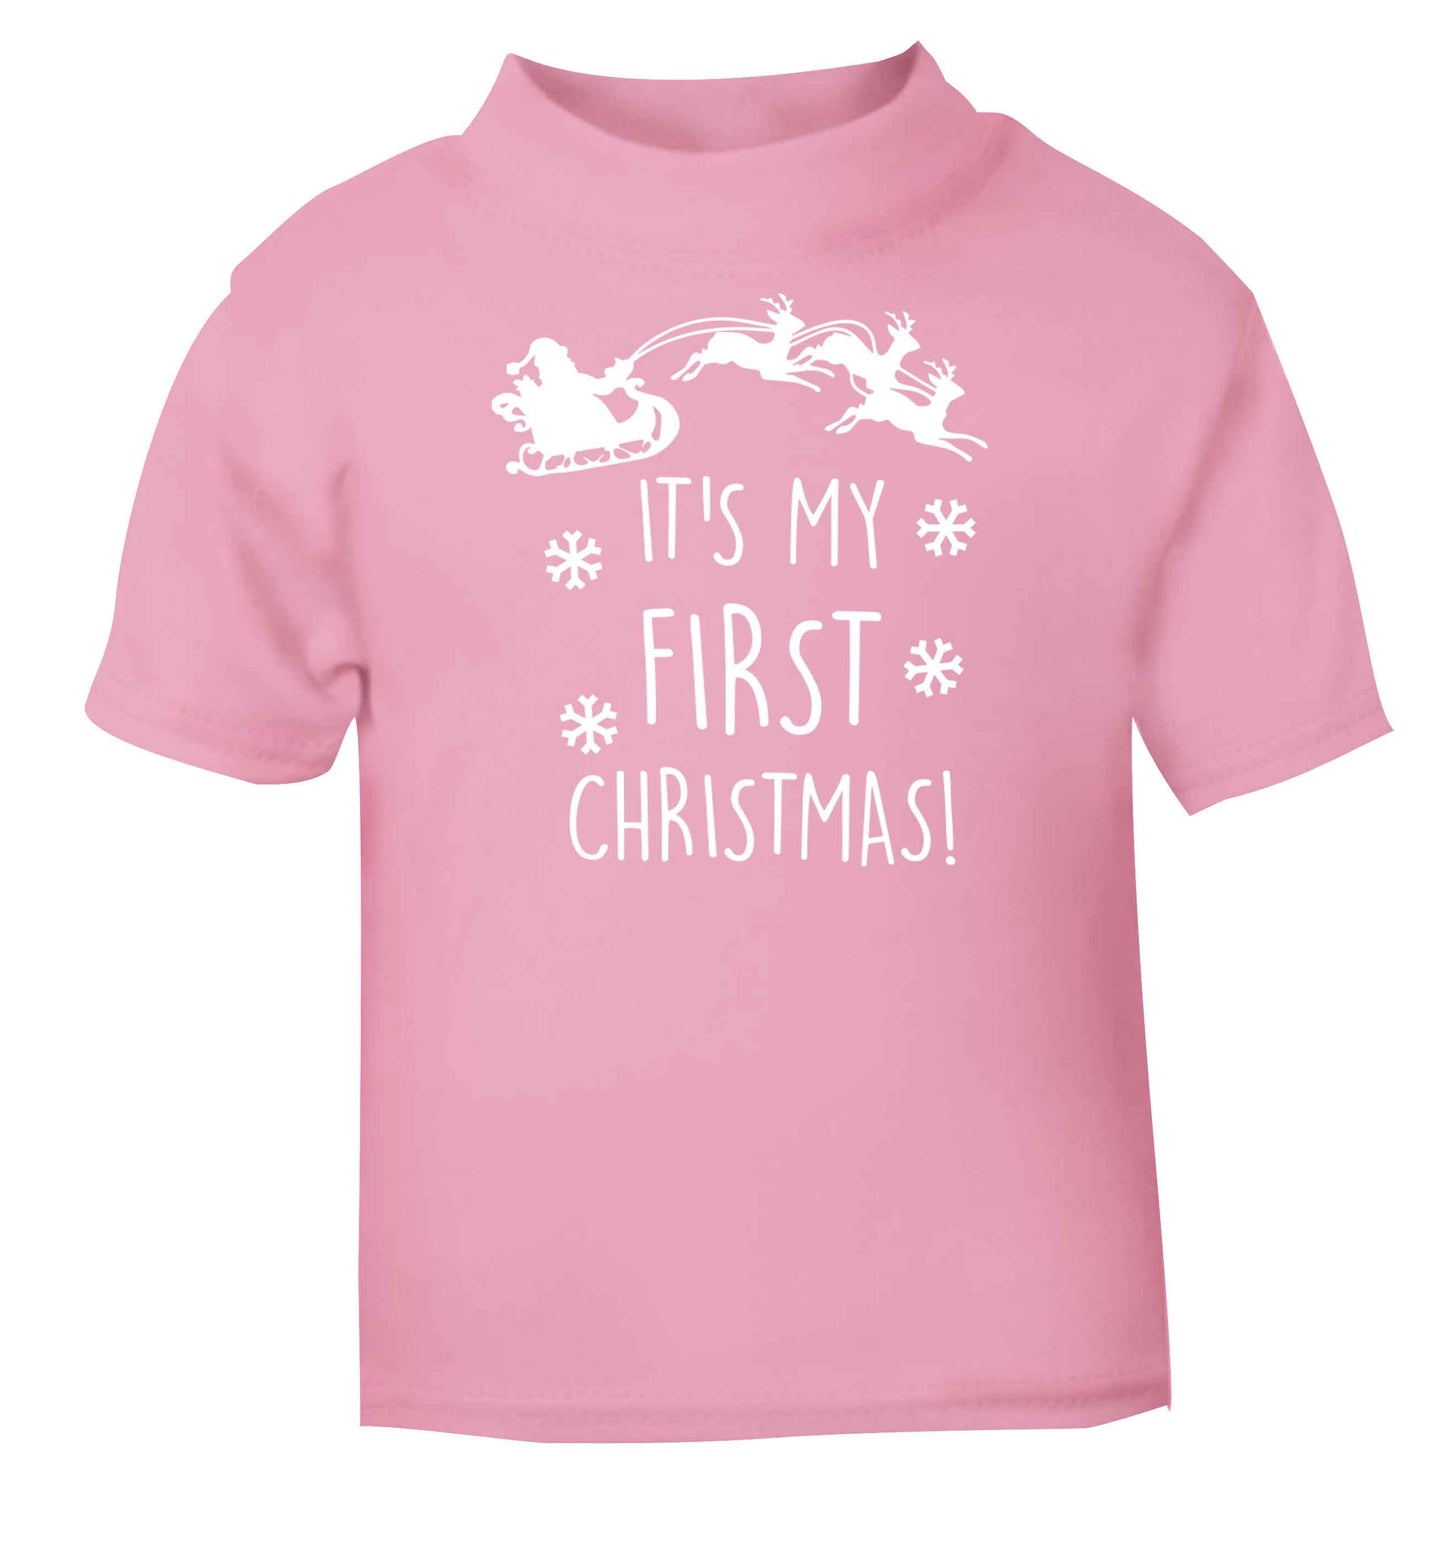 It's my first Christmas - Santa sleigh text light pink baby toddler Tshirt 2 Years